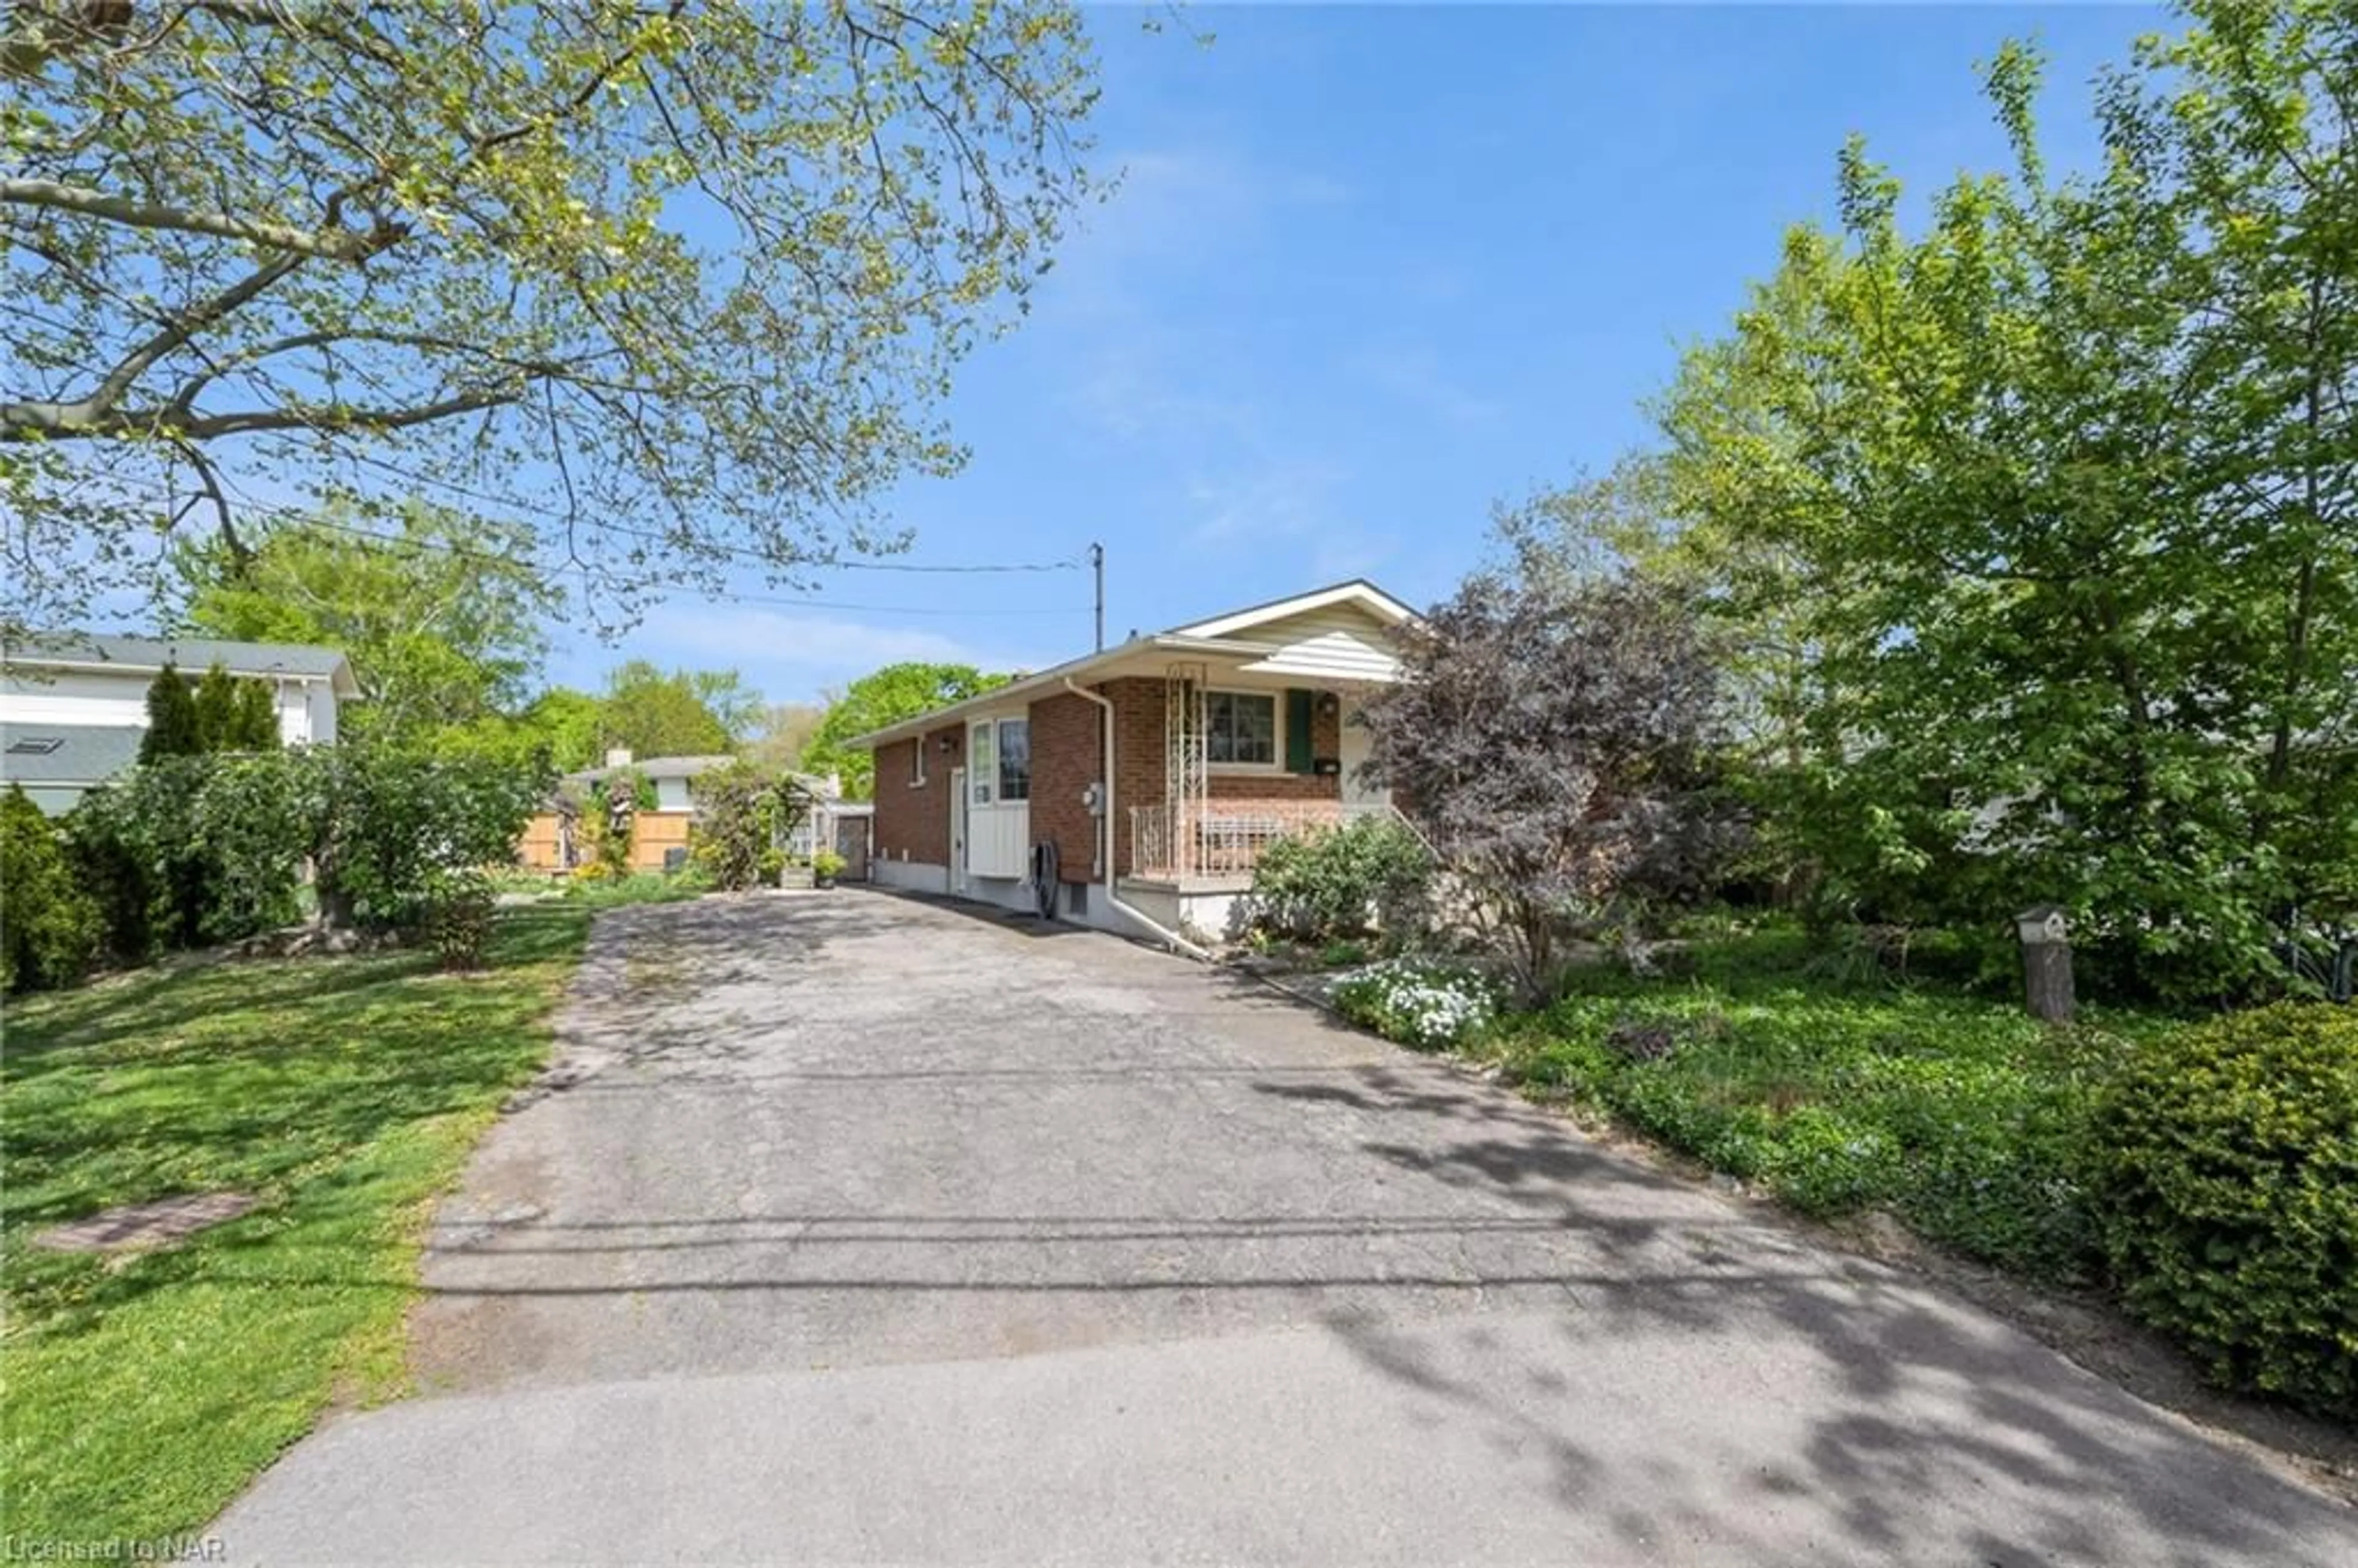 Frontside or backside of a home for 508A Niagara St, St. Catharines Ontario L2M 3P5